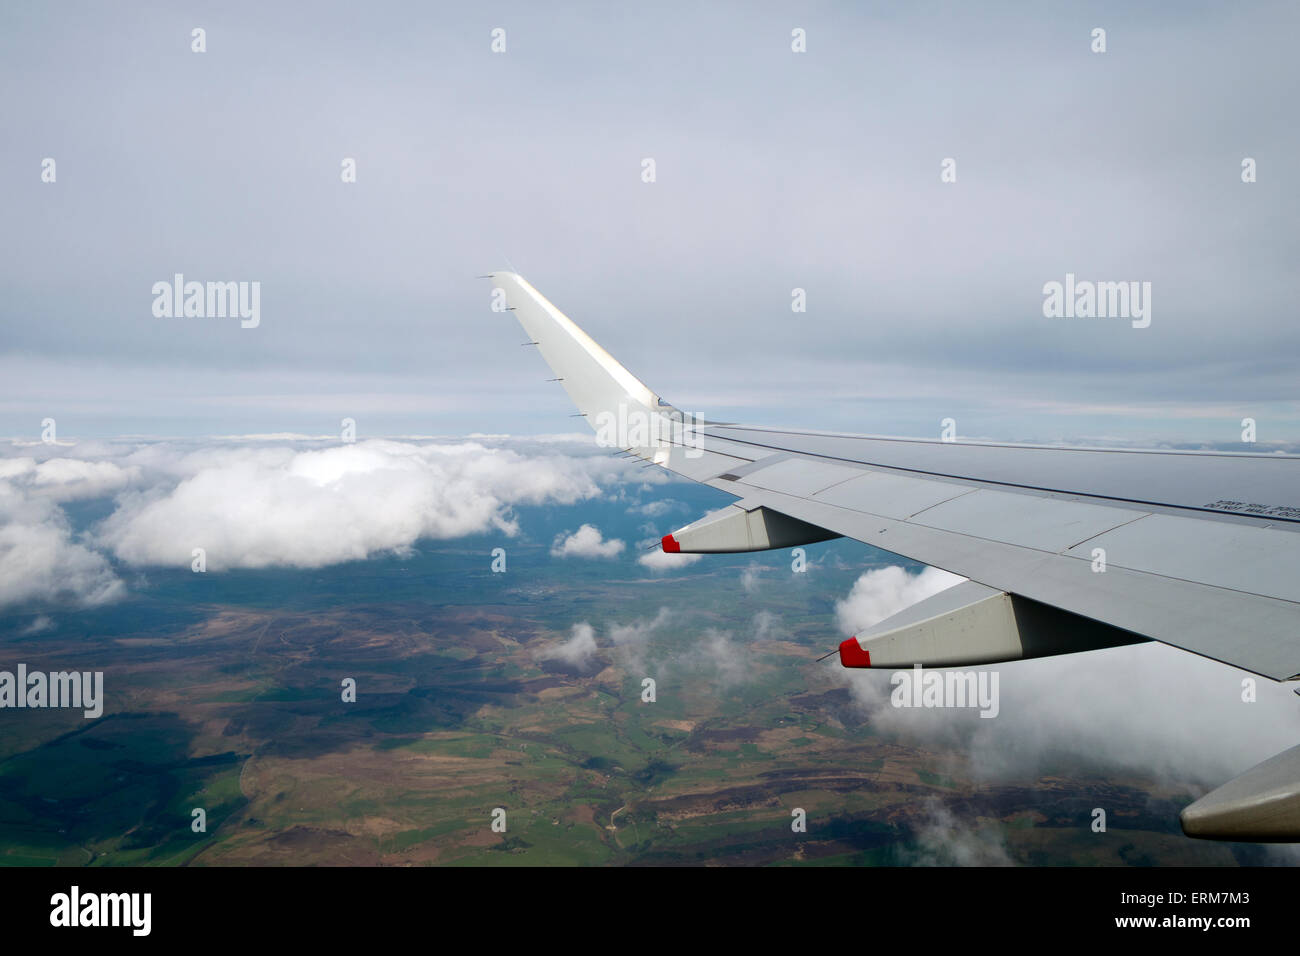 Arrival at London Heathrow airport a view through the window flying wing fields clouds Stock Photo